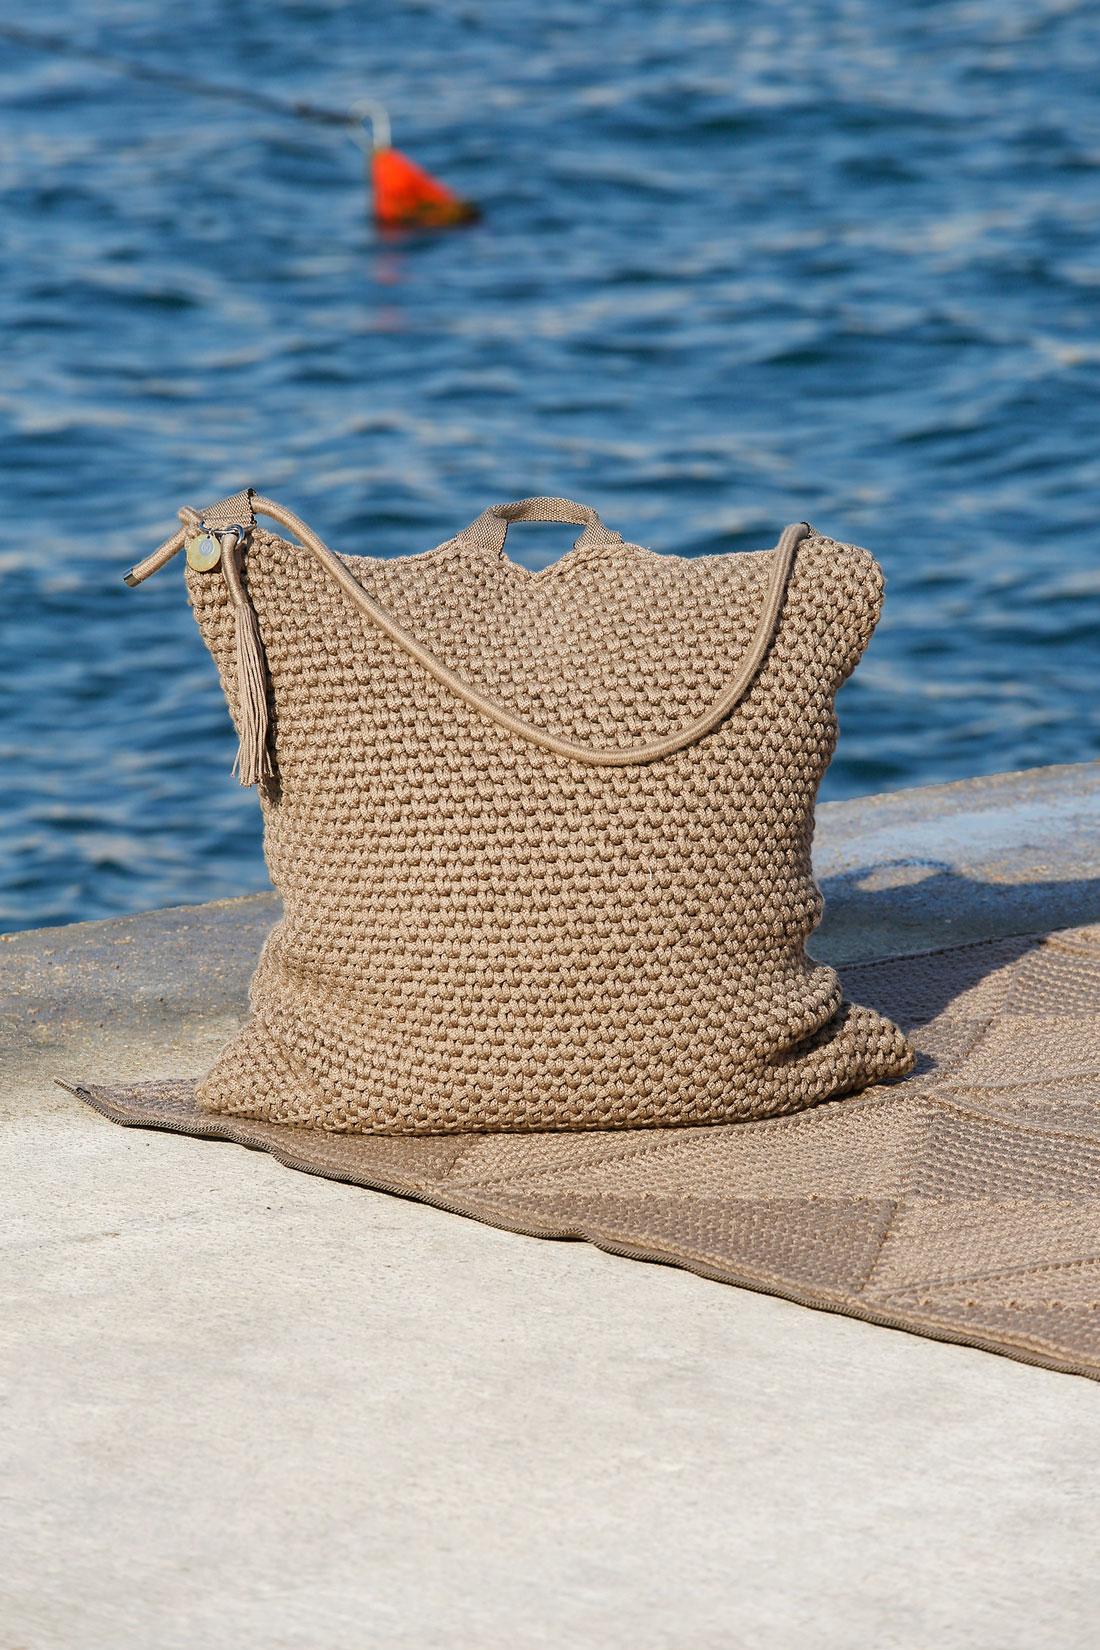 The iota cushion, inspired by the movement between our homes and the outdoors, can be used in many ways. It can provide an additional seat in your living room, be thrown on the lawn or carried easily to the beach with a towel and a book. Handmade